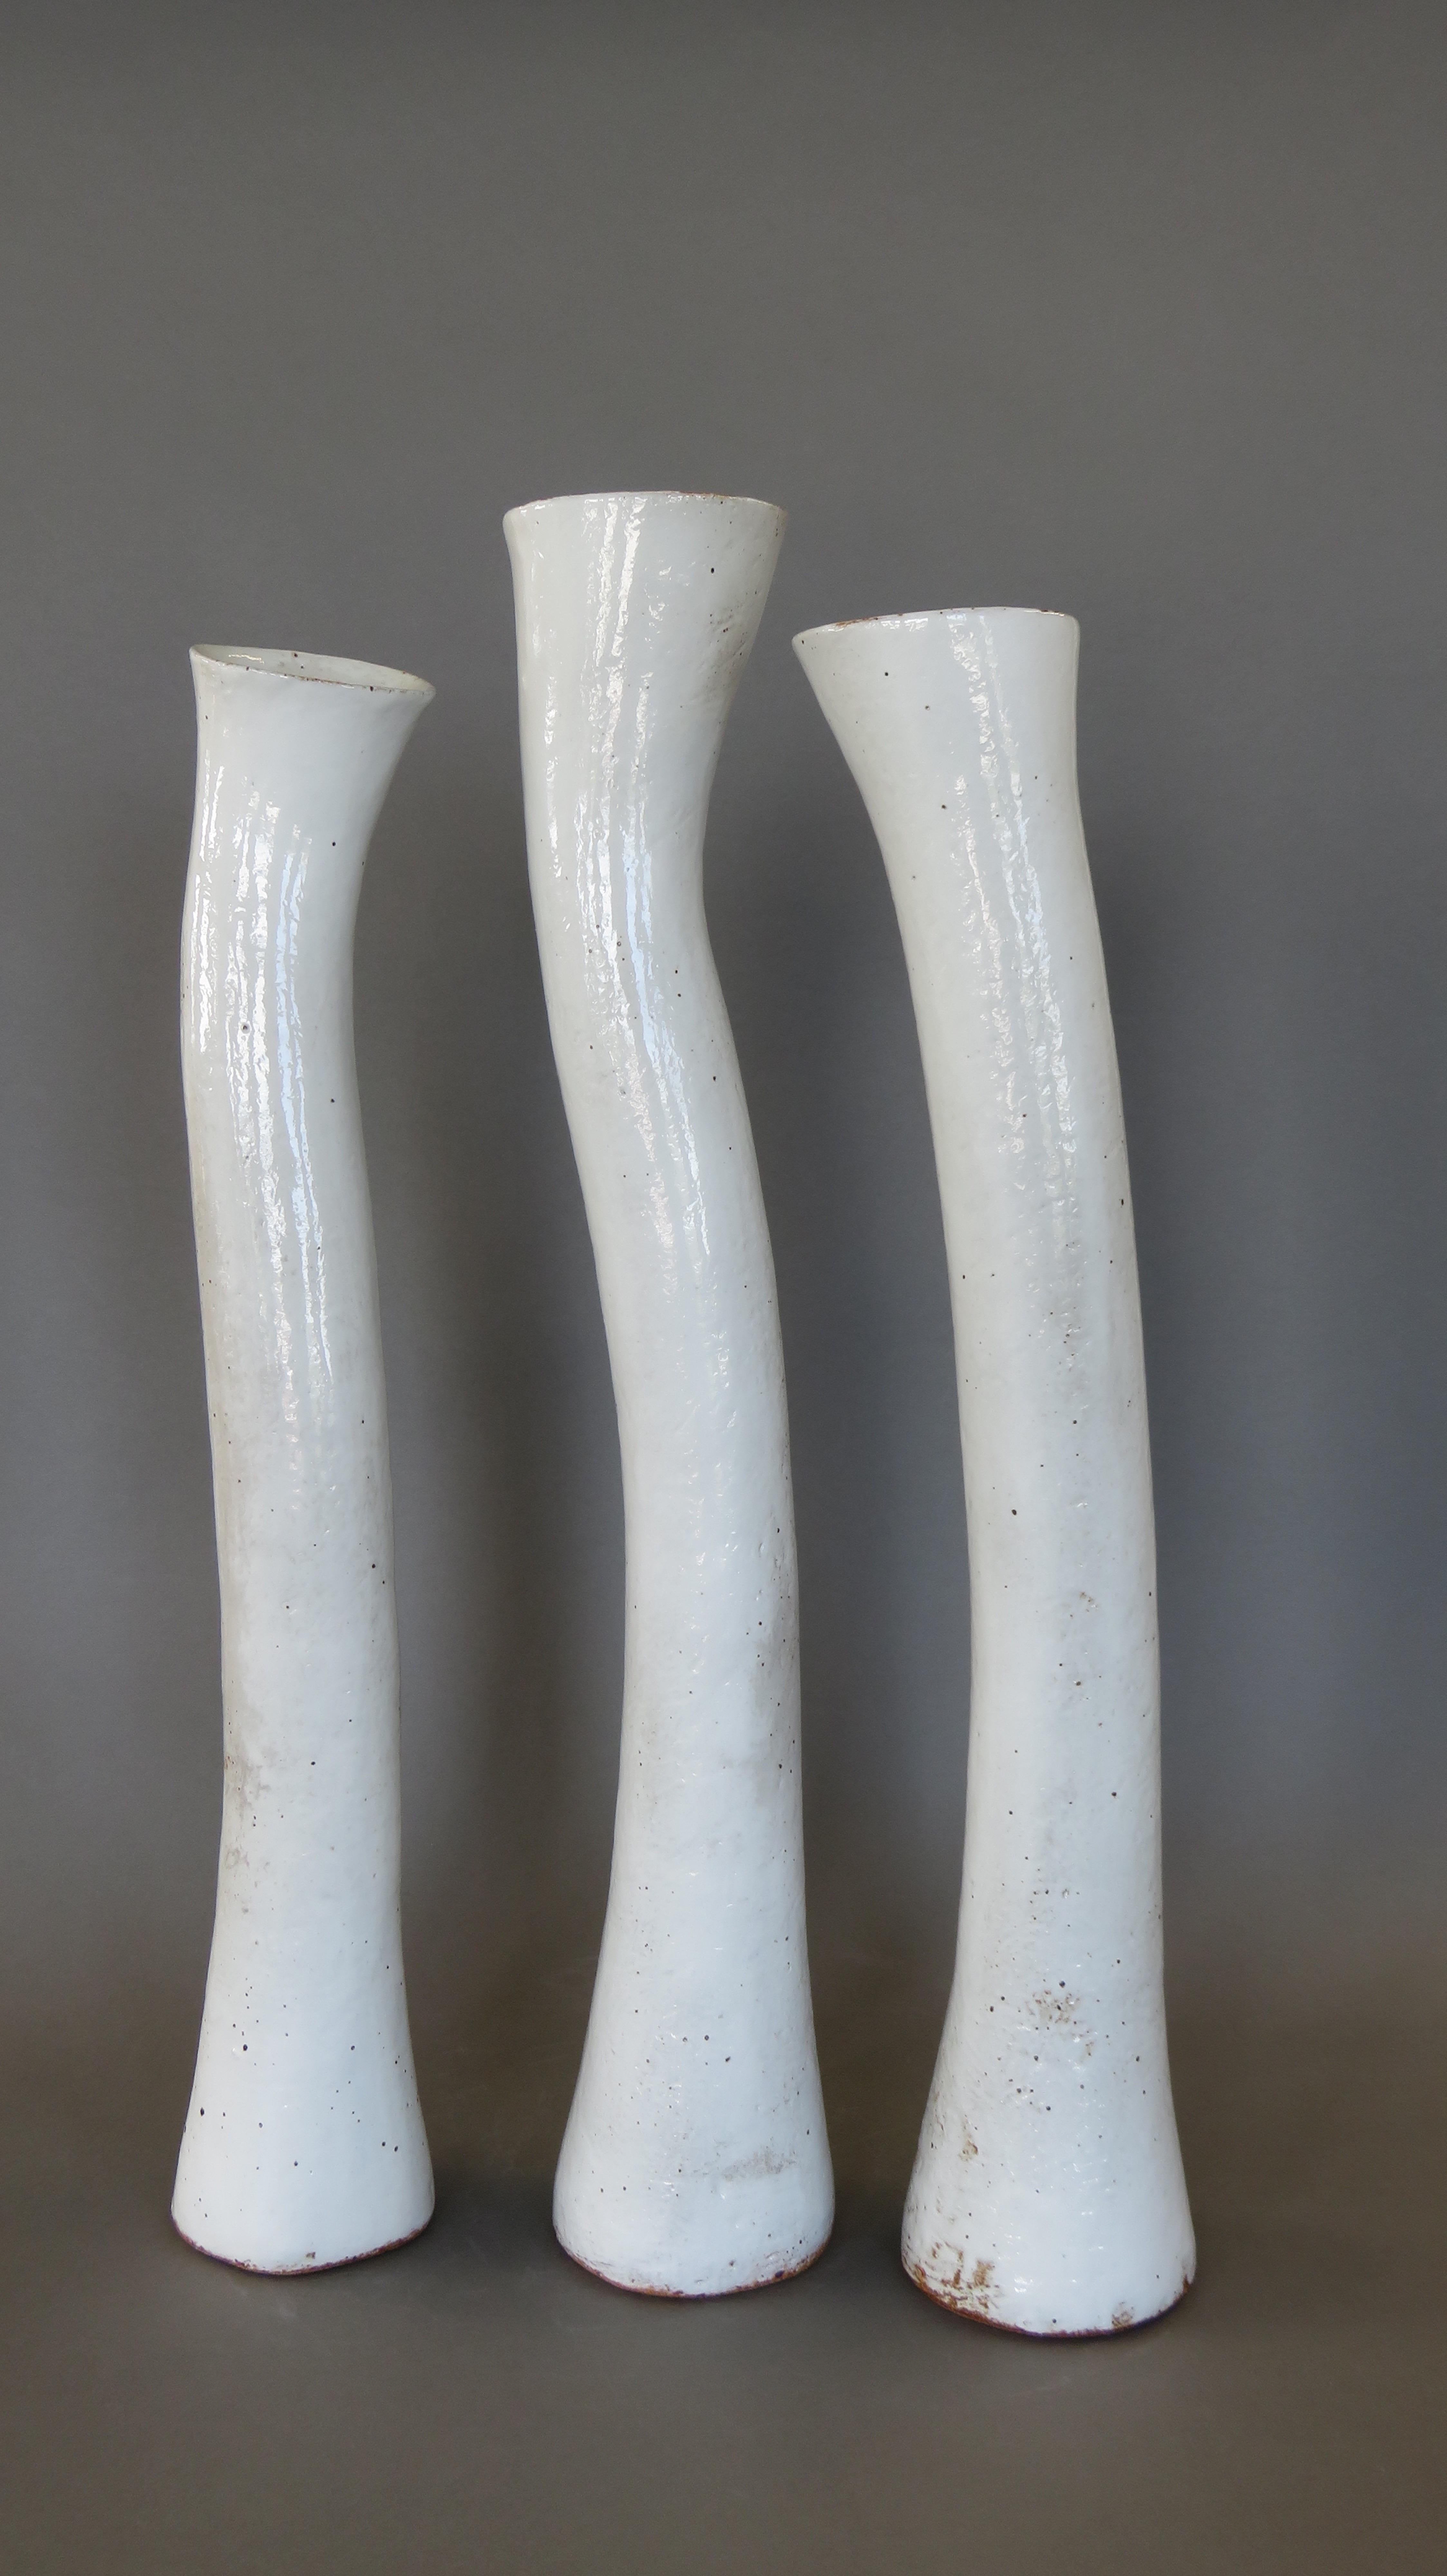 Tall Hand Built Ceramic Vase, White Glaze on Stoneware, 22.88 Inches Tall For Sale 3